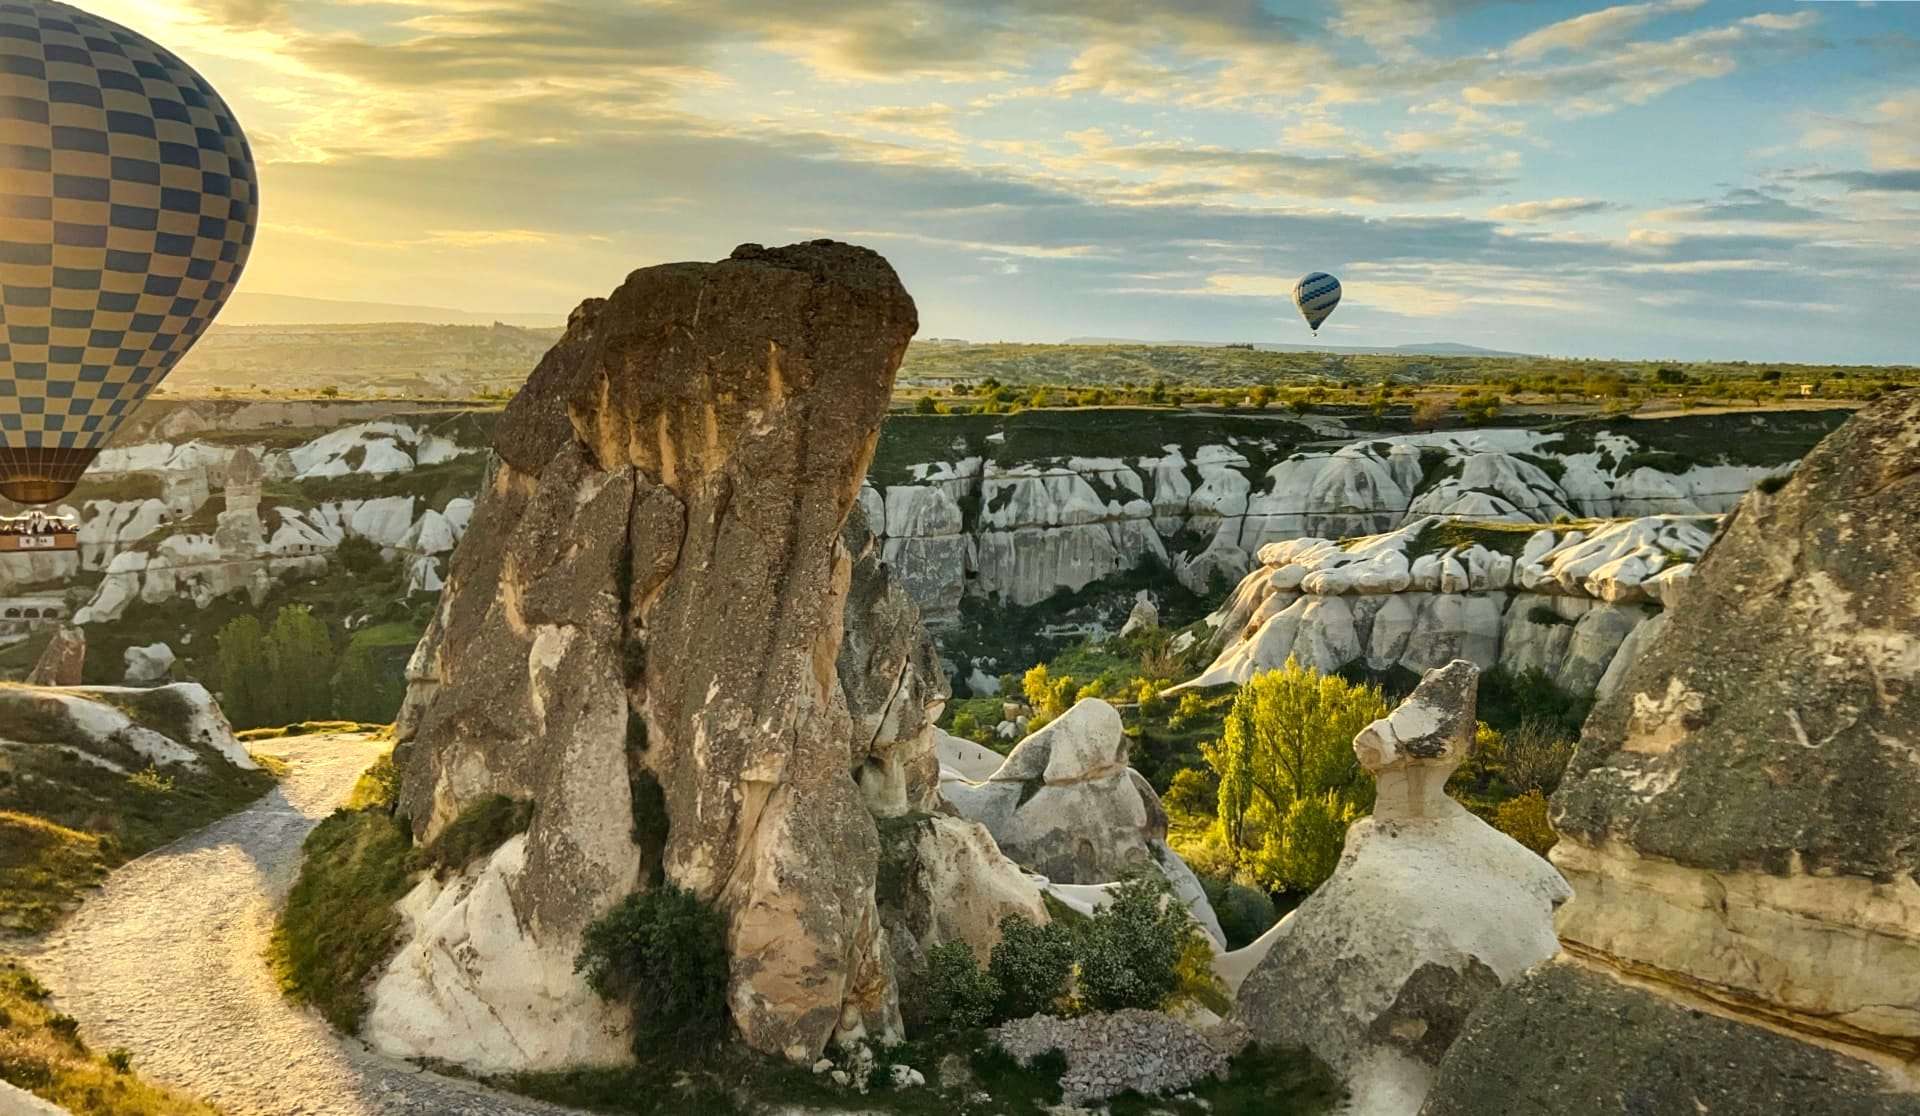 Turkey’s Cappadocia region would be the perfect place to trip on ’shrooms.